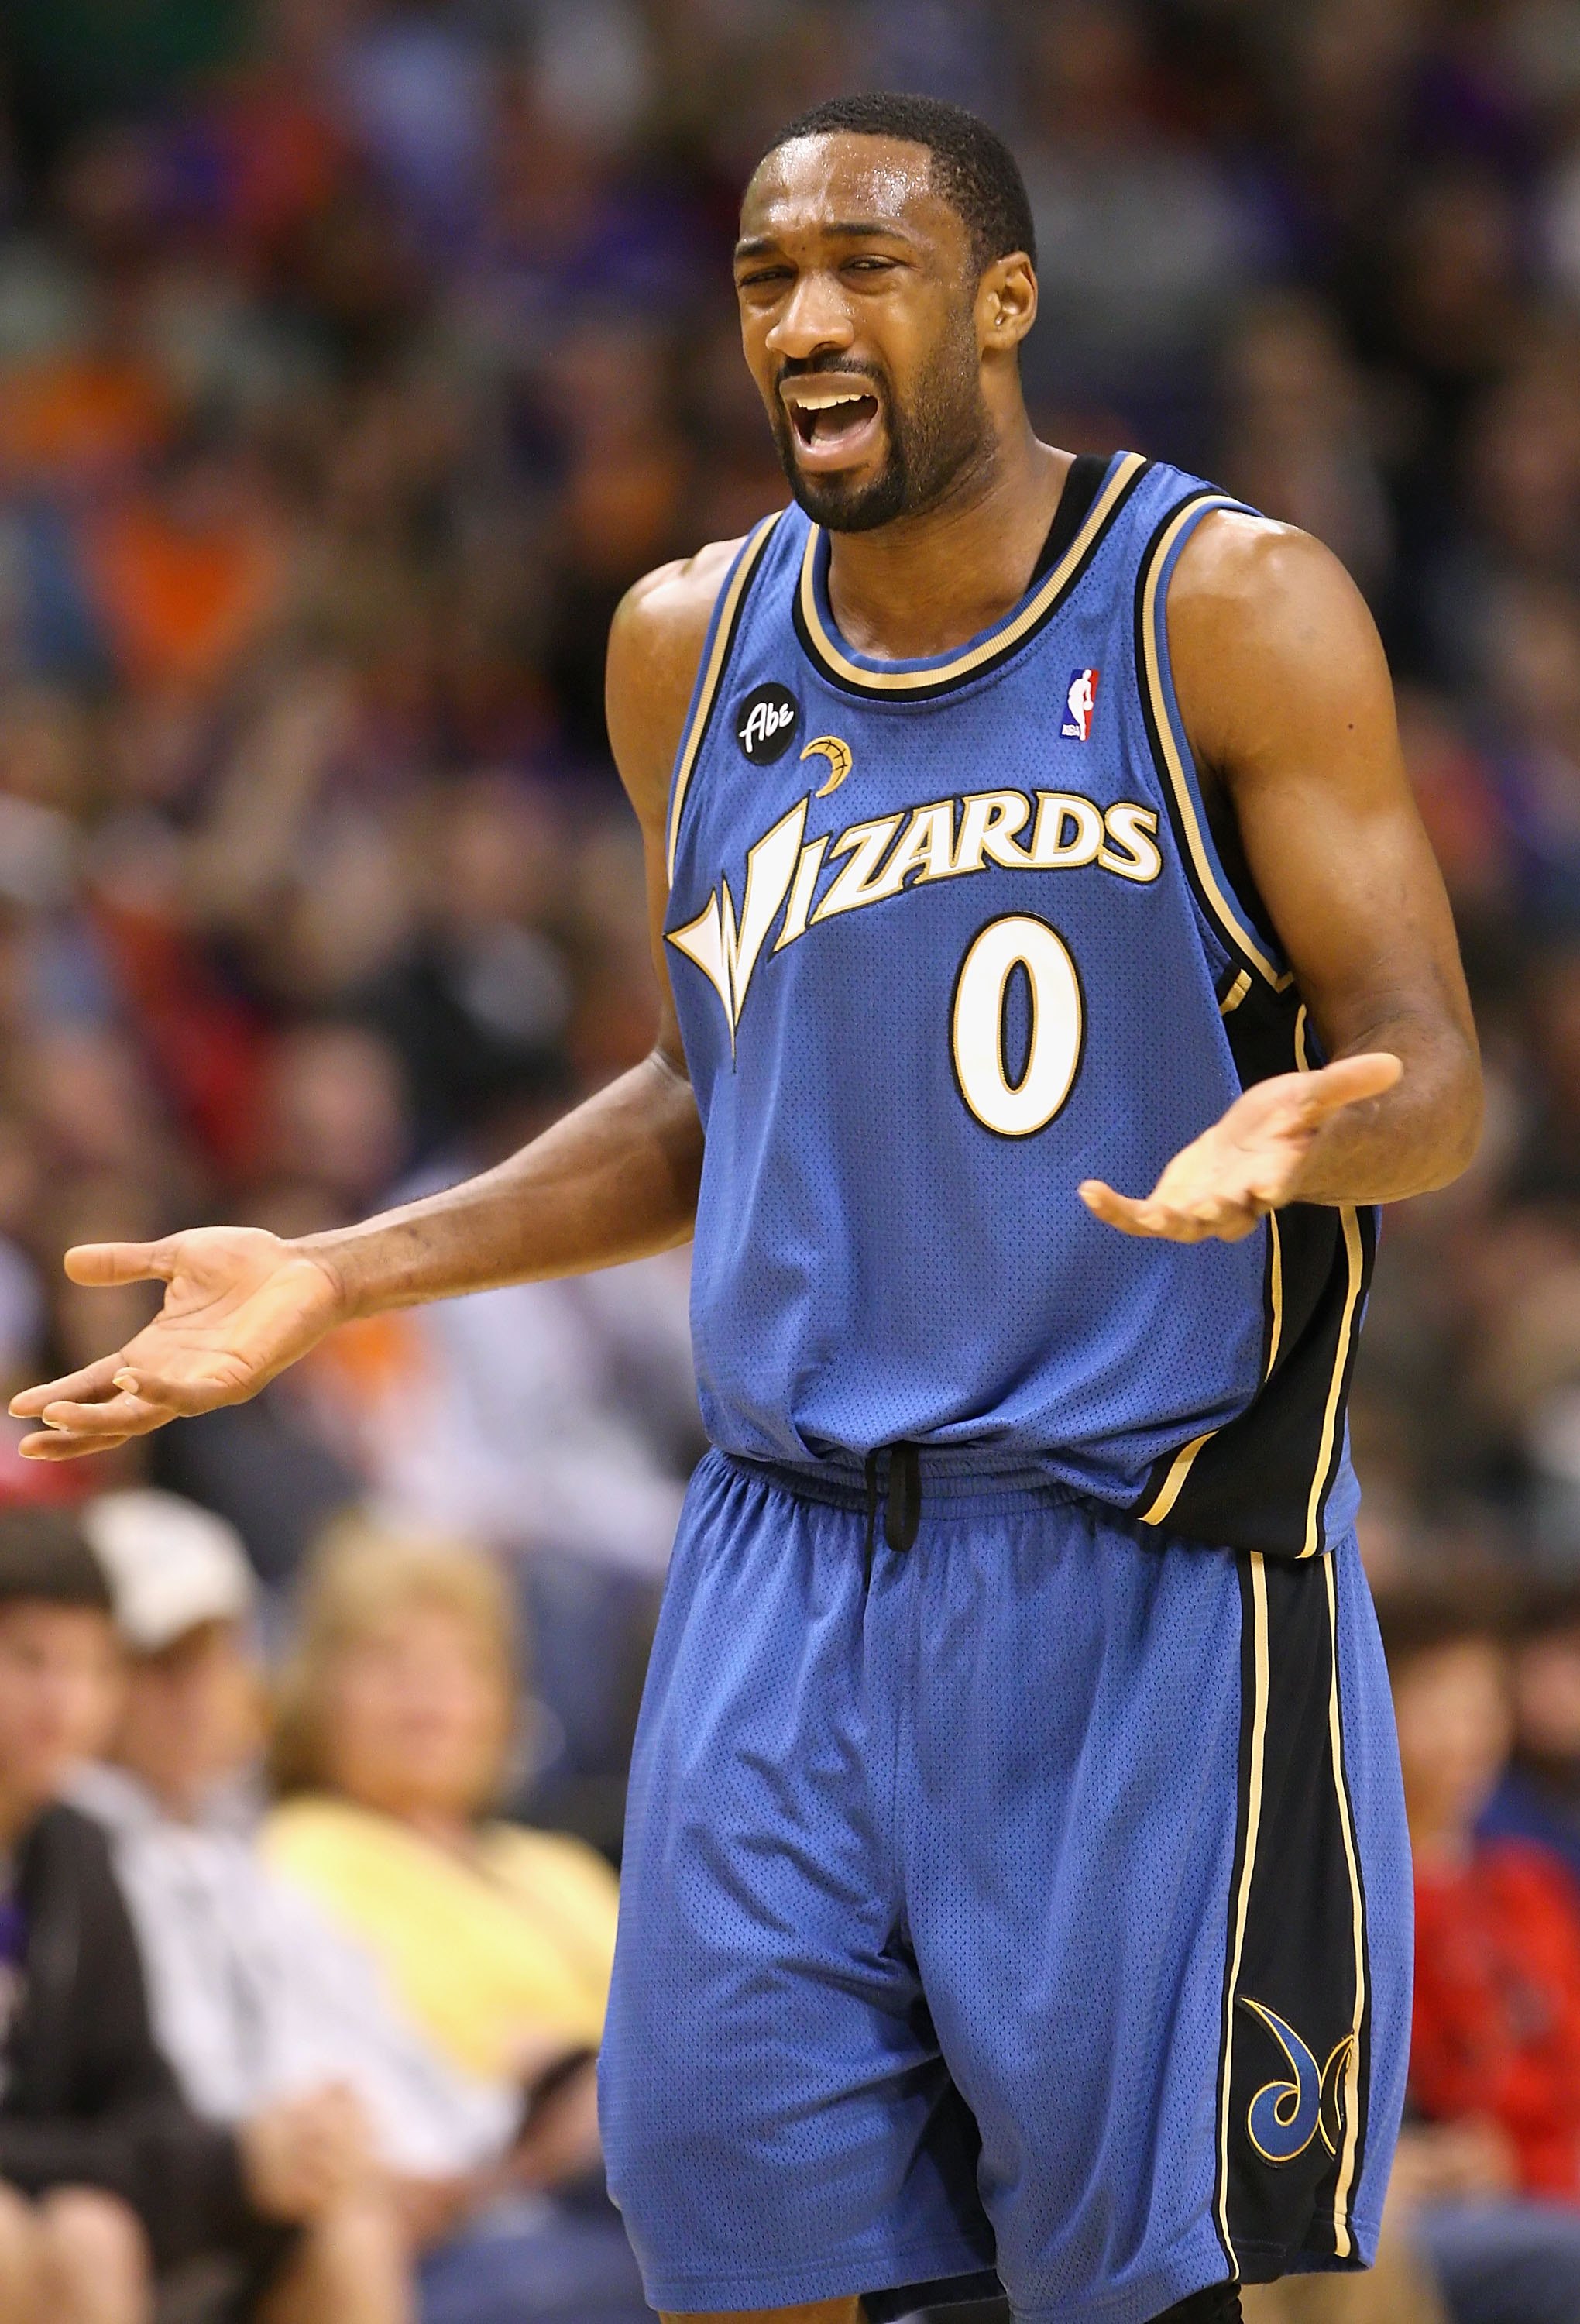 PHOENIX - DECEMBER 19:  Gilbert Arenas #0 of the Washington Wizards reacts during the NBA game against the Phoenix Suns at US Airways Center on December 19, 2009 in Phoenix, Arizona. The Suns defeated the Wizards 121-95. NOTE TO USER: User expressly ackno